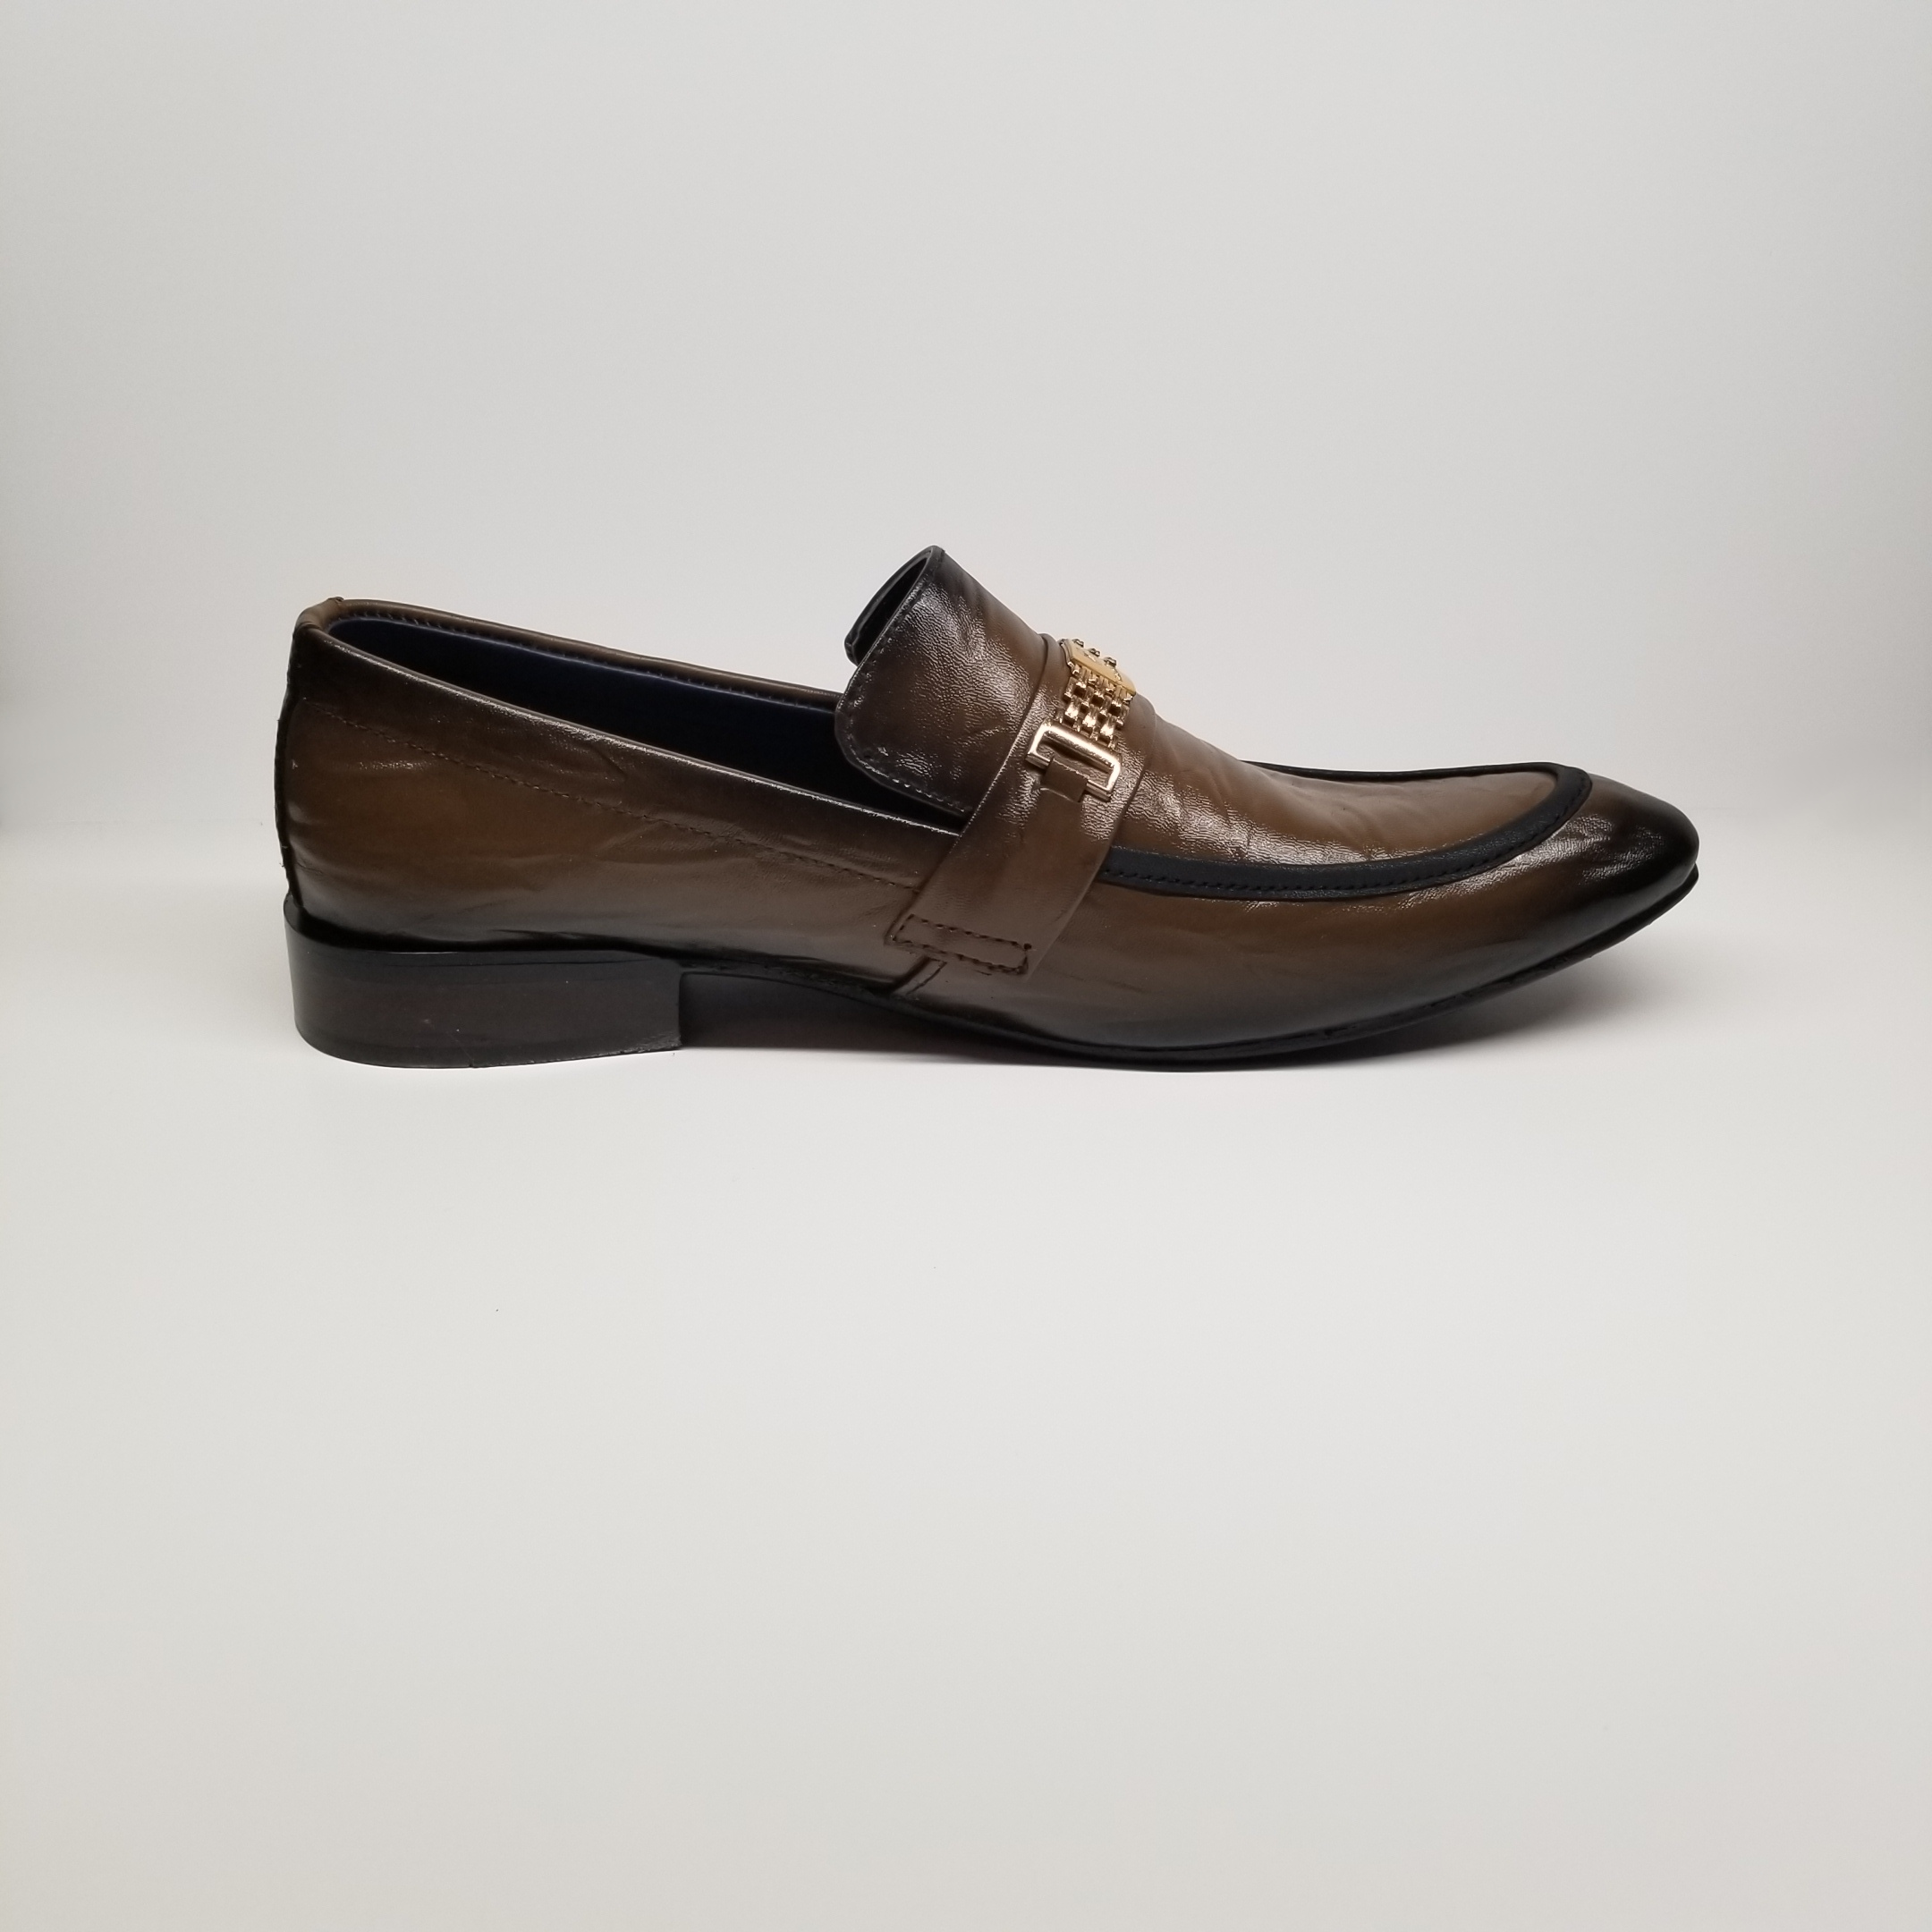 Legend dress shoes by Walkies at NMFootwear.com